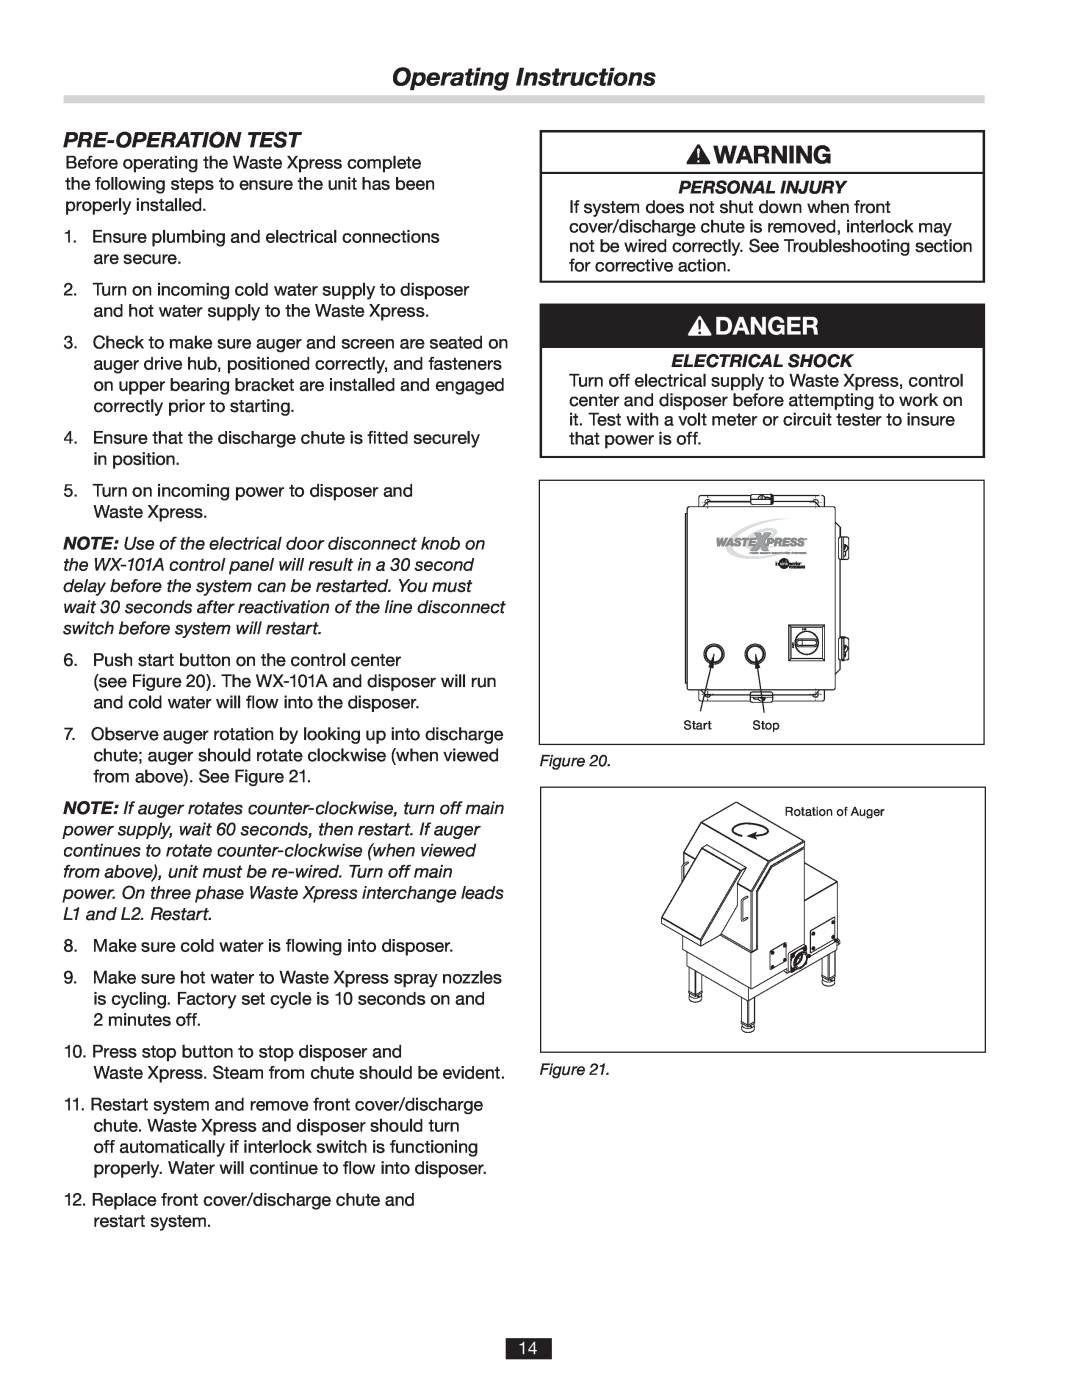 InSinkErator 14481 manual Operating Instructions, Pre-Operation Test, Personal Injury, Electrical Shock 